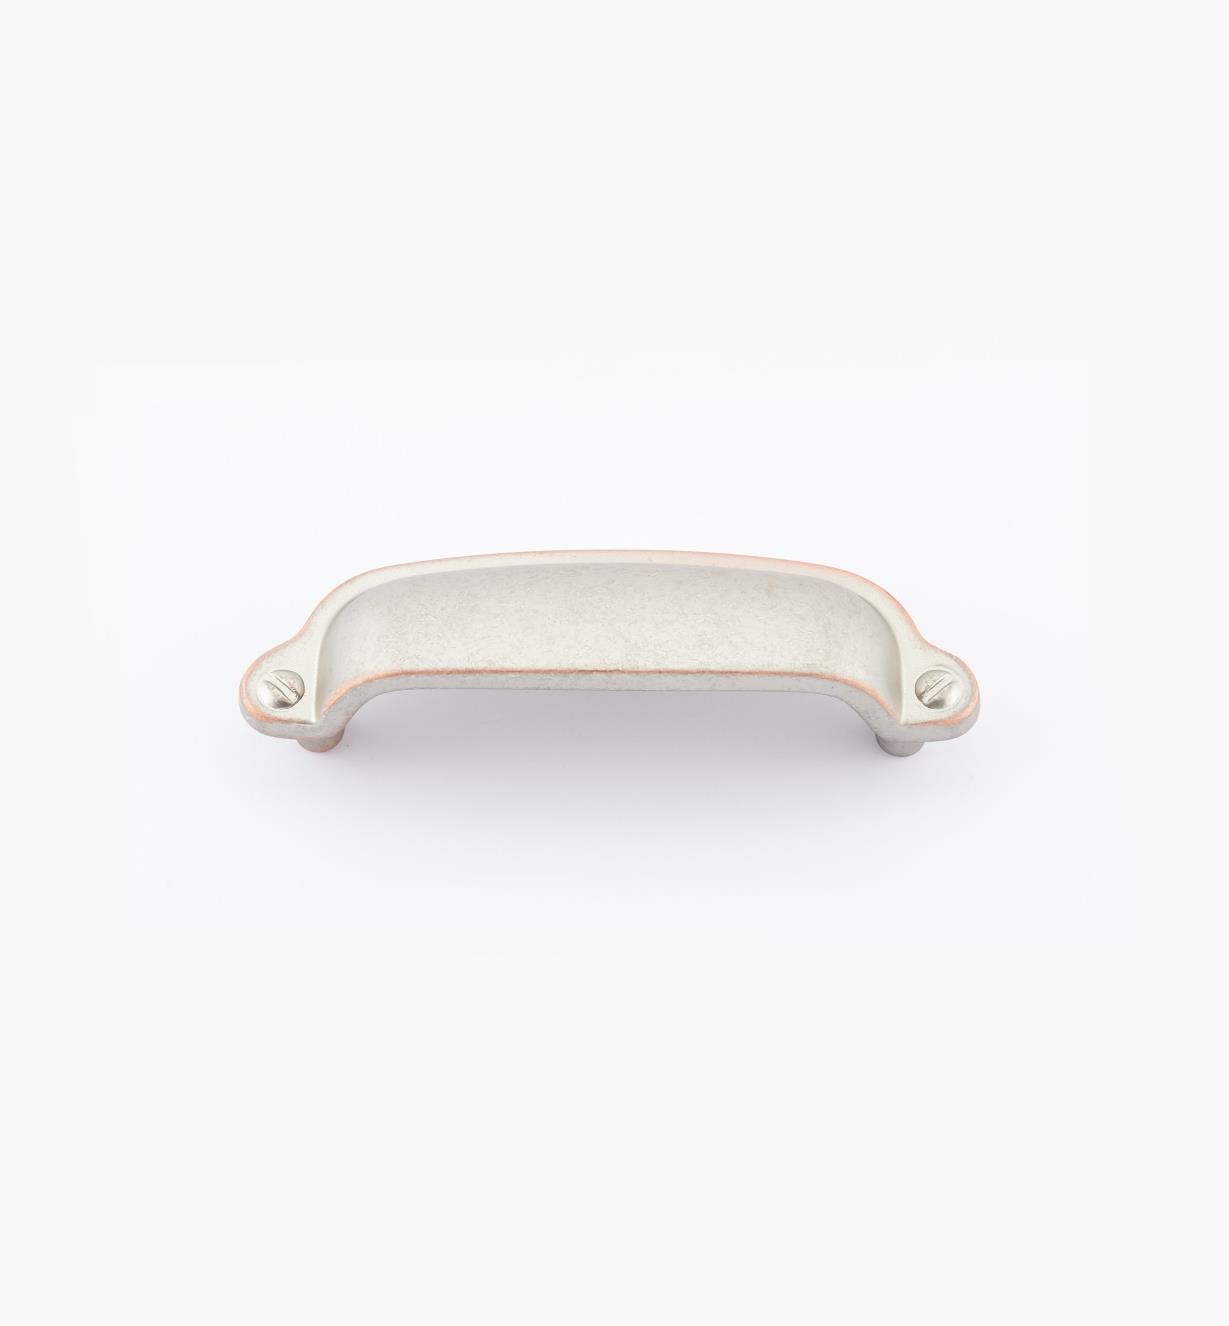 02W1849 - 3 7/8" Weathered Nickel-Copper Rectangle Cup Pull (3")